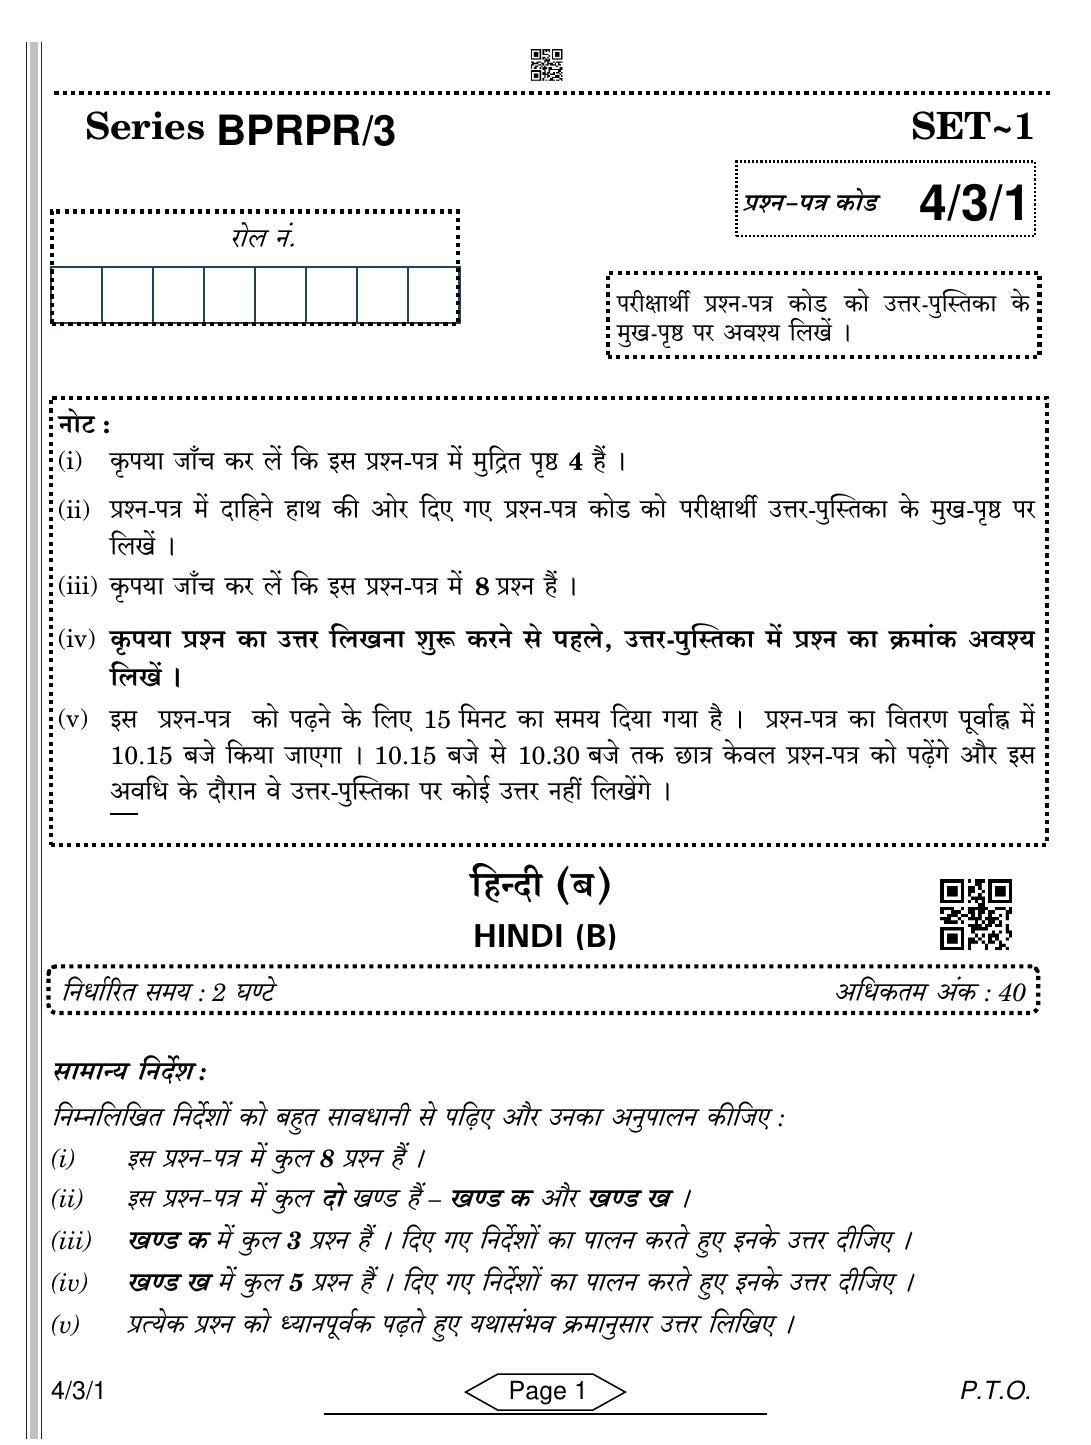 CBSE Class 10 4-3-1 Hindi B 2022 Question Paper - Page 1